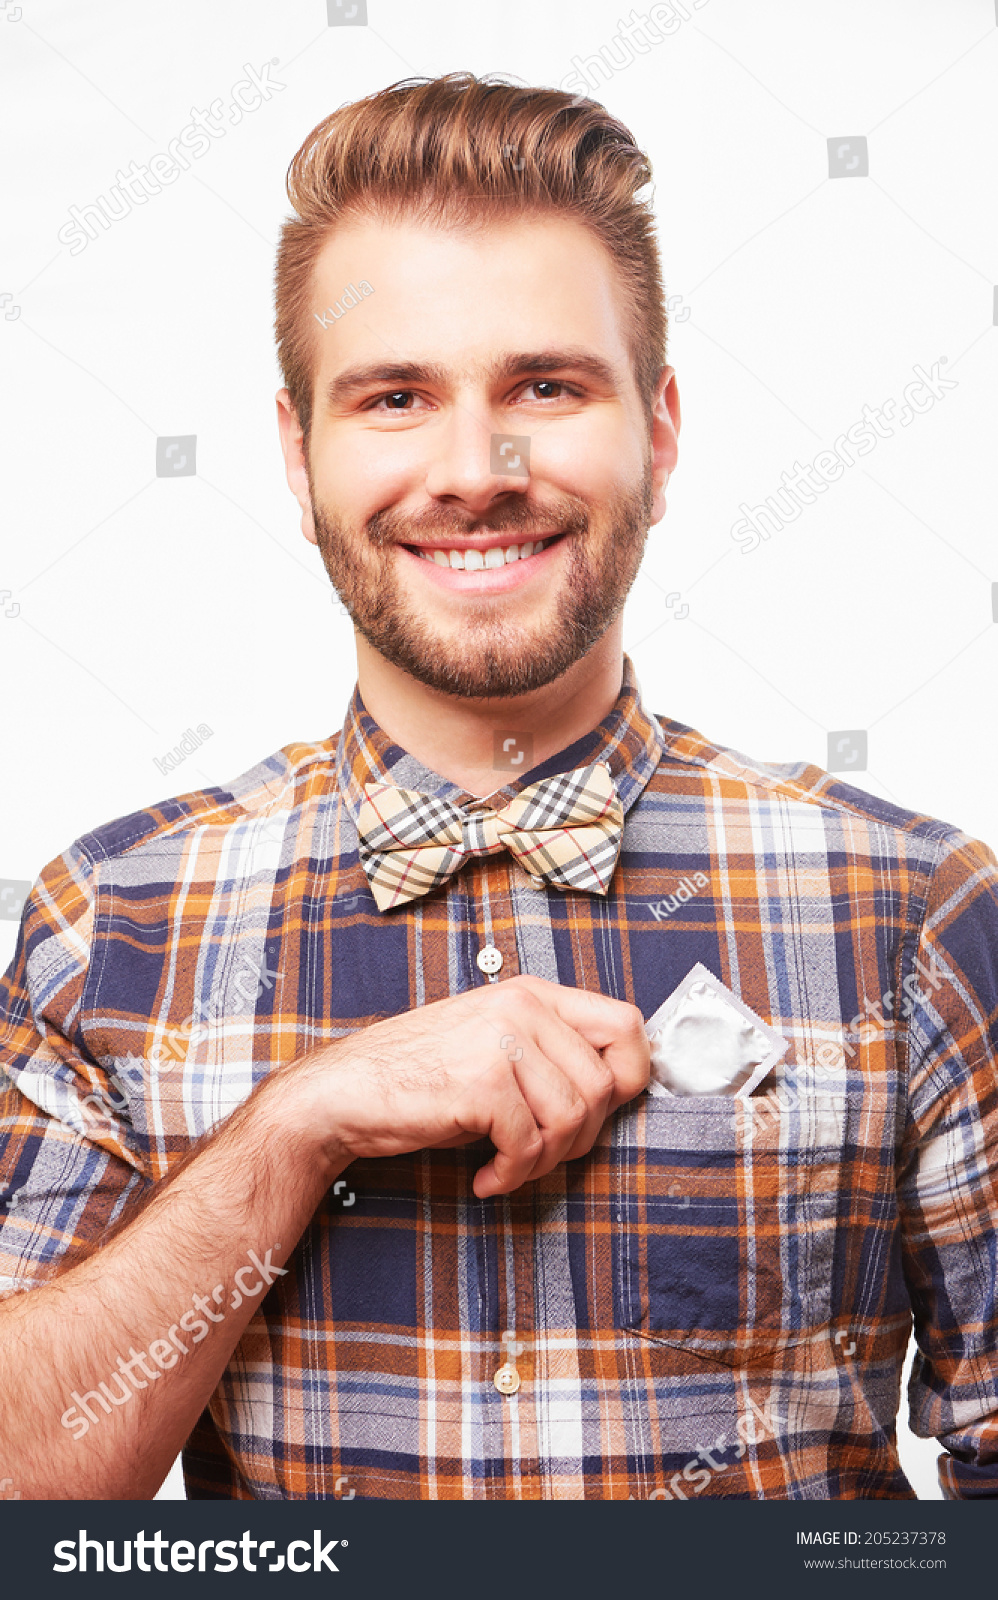 Young Handsome Smiling Man Putting Condom Stock Photo 205237378 ...